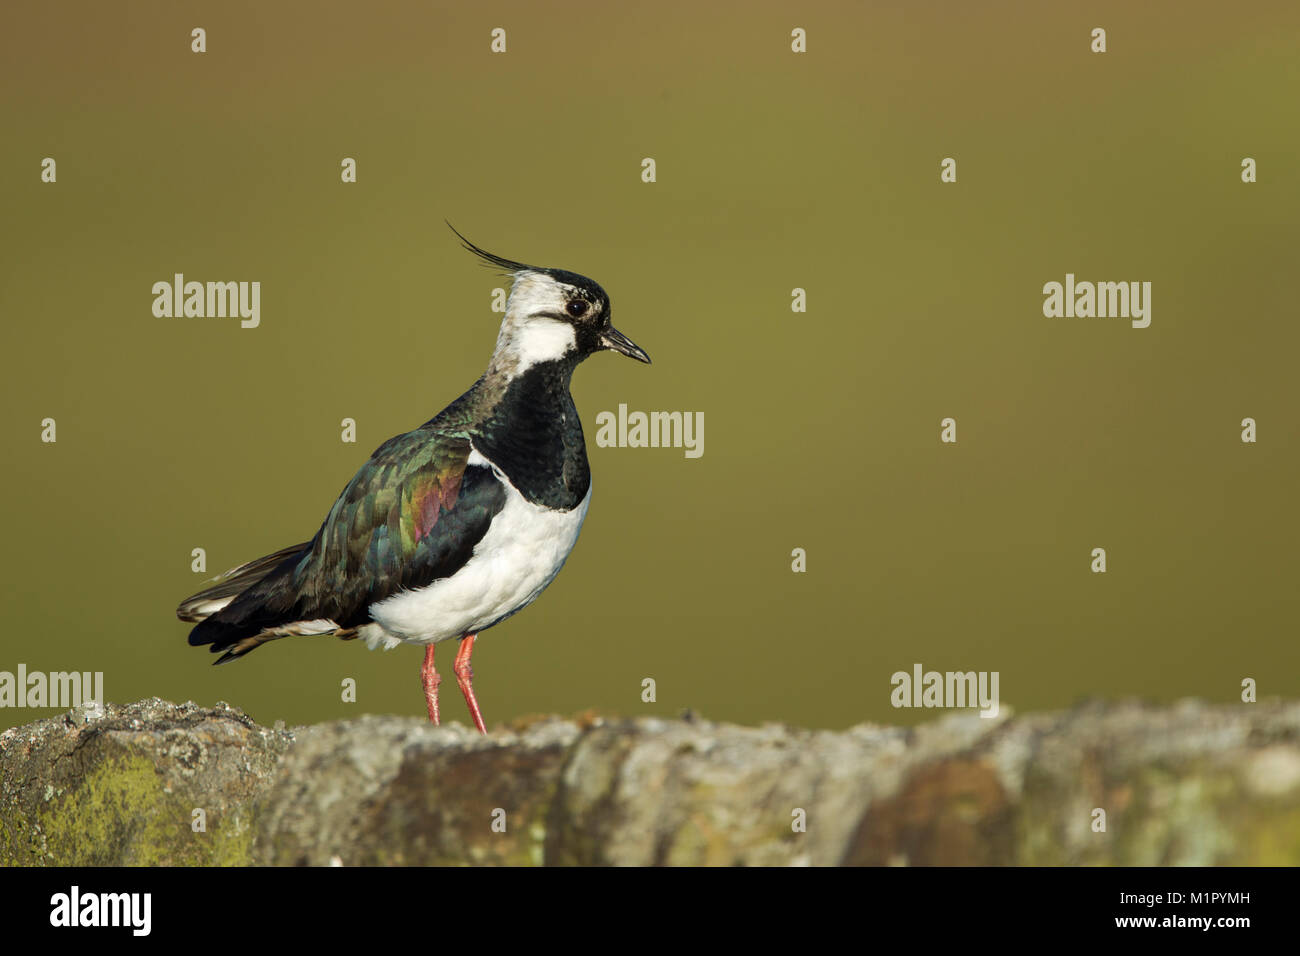 Northern lapwing (Vanellus vanellus) standing on a stone wall in morning light showing irridescent plumage Stock Photo